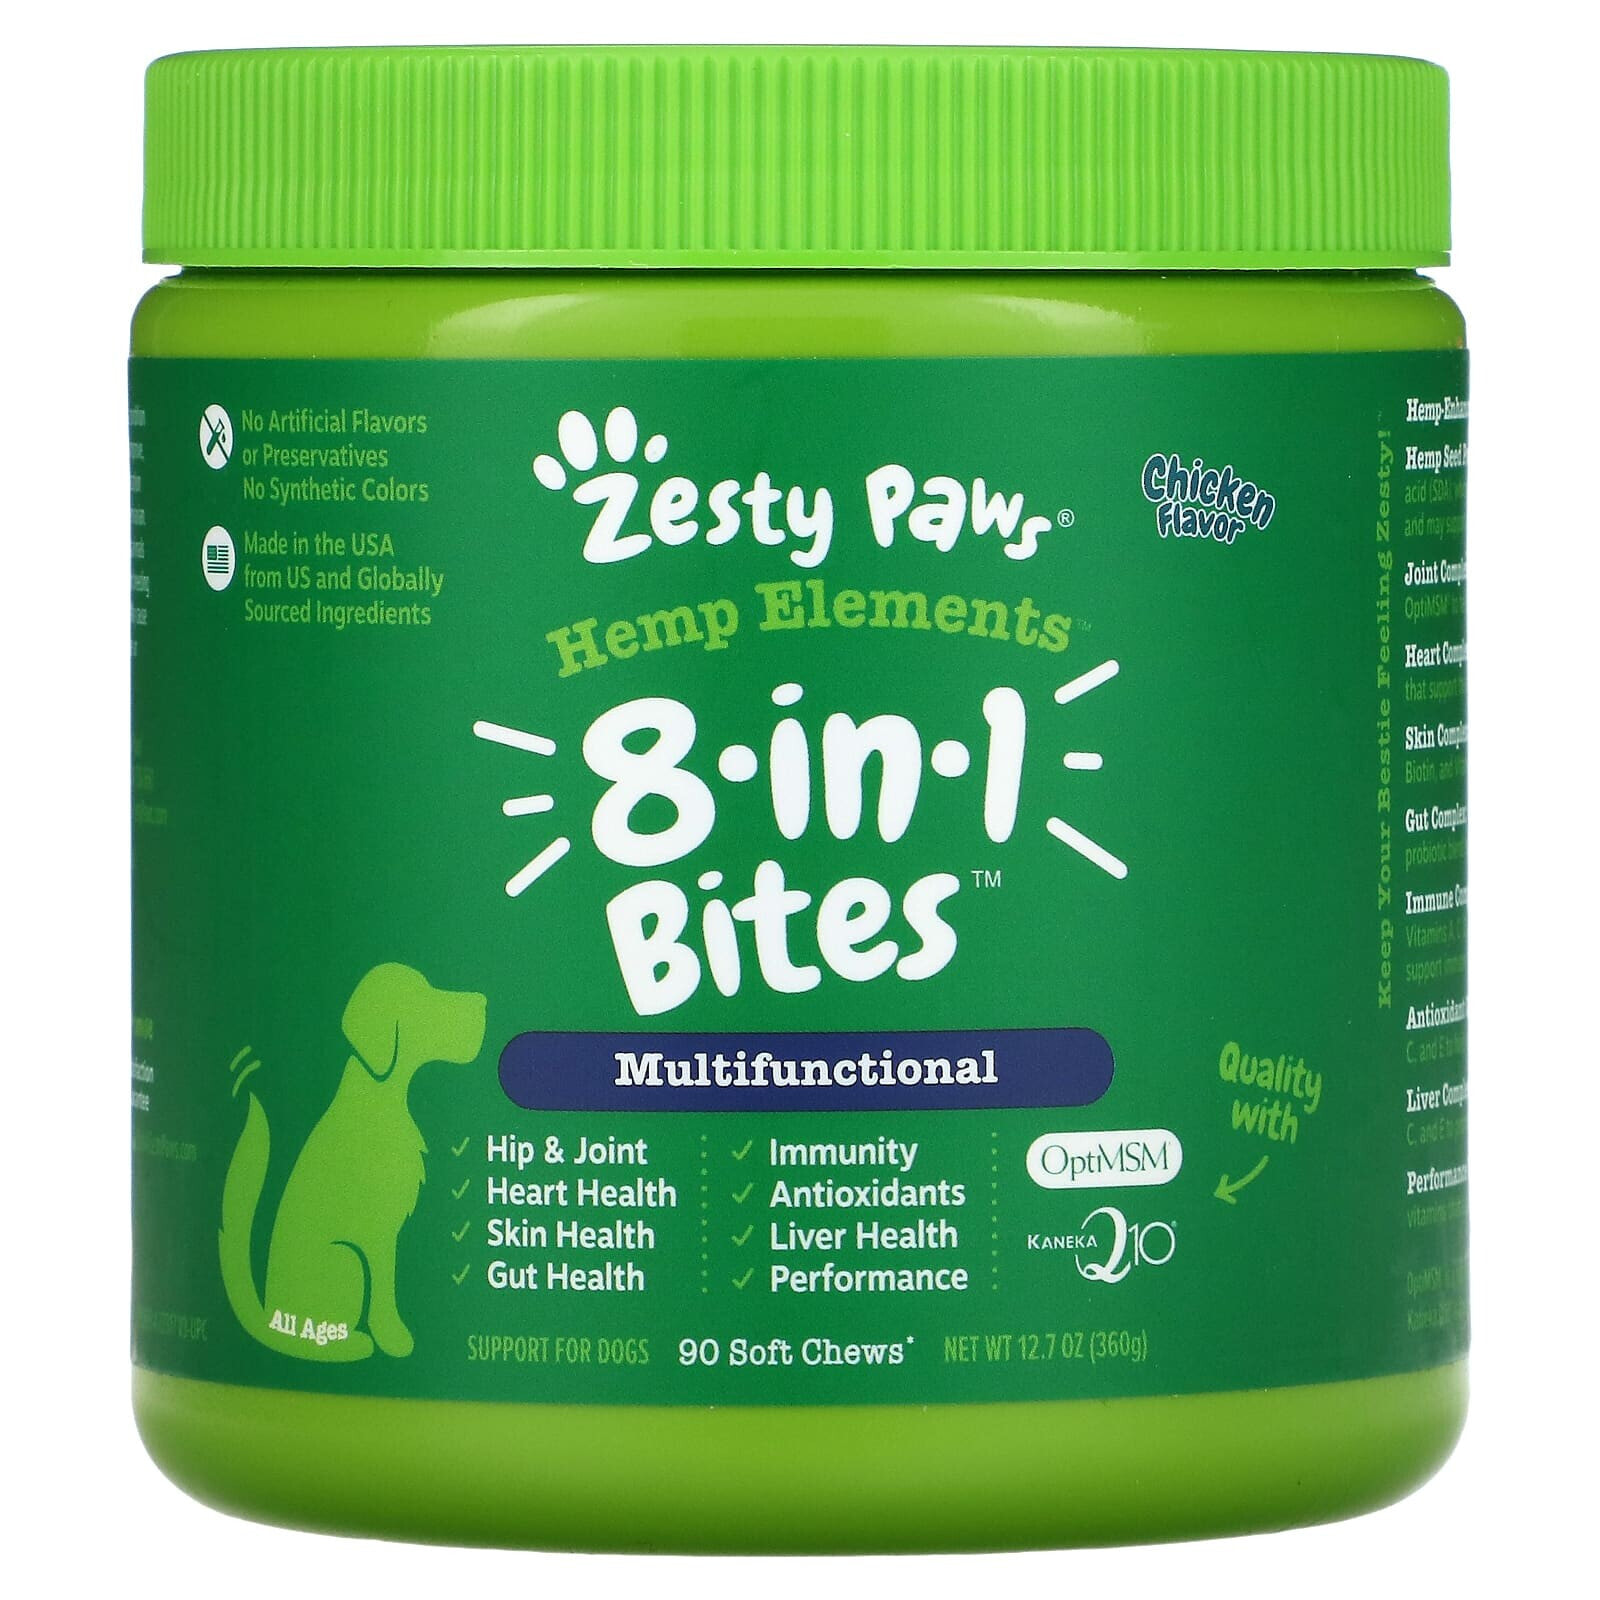 8-in-1 Bites for Dogs, Multifunctional, All Ages, Peanut Butter, 90 Soft Chews, 12.7 oz (360 g)